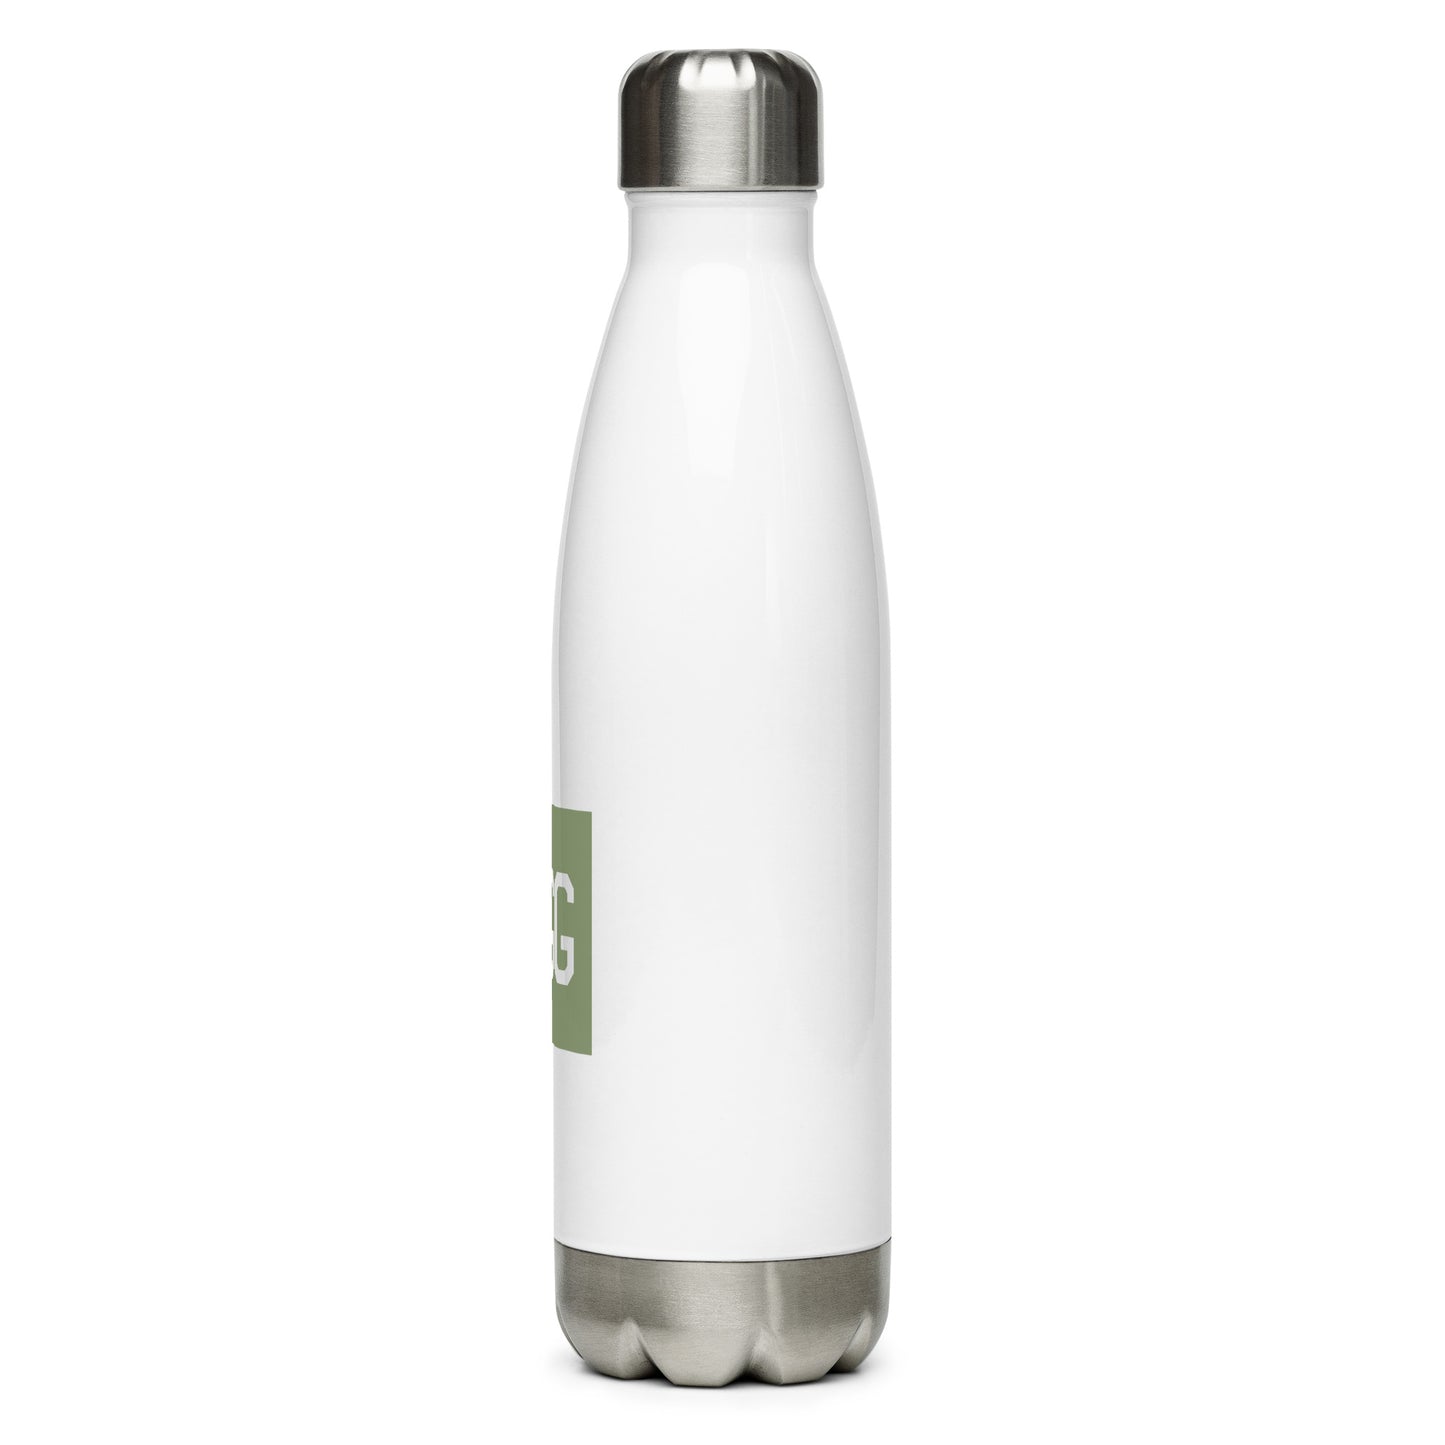 Aviation Gift Water Bottle - Camo Green • OGG Maui • YHM Designs - Image 08